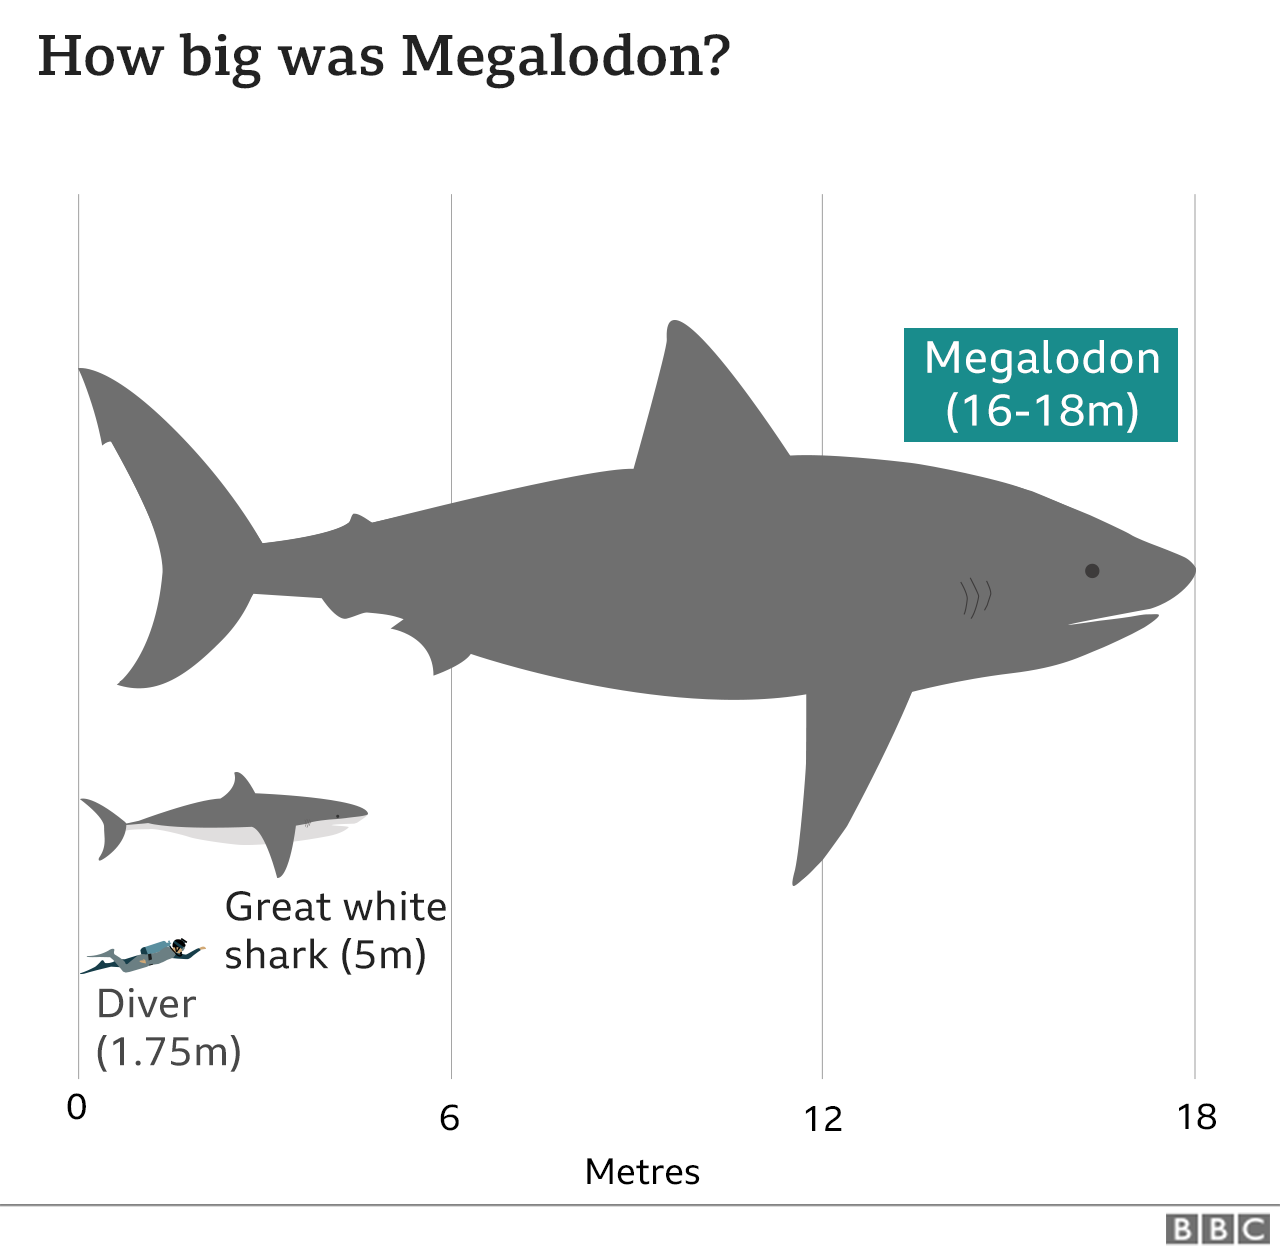 Graphic showing the Megalodon was a maximum of 16-18 metres long, while great white sharks are 5 metres and humans about 1.75 metres